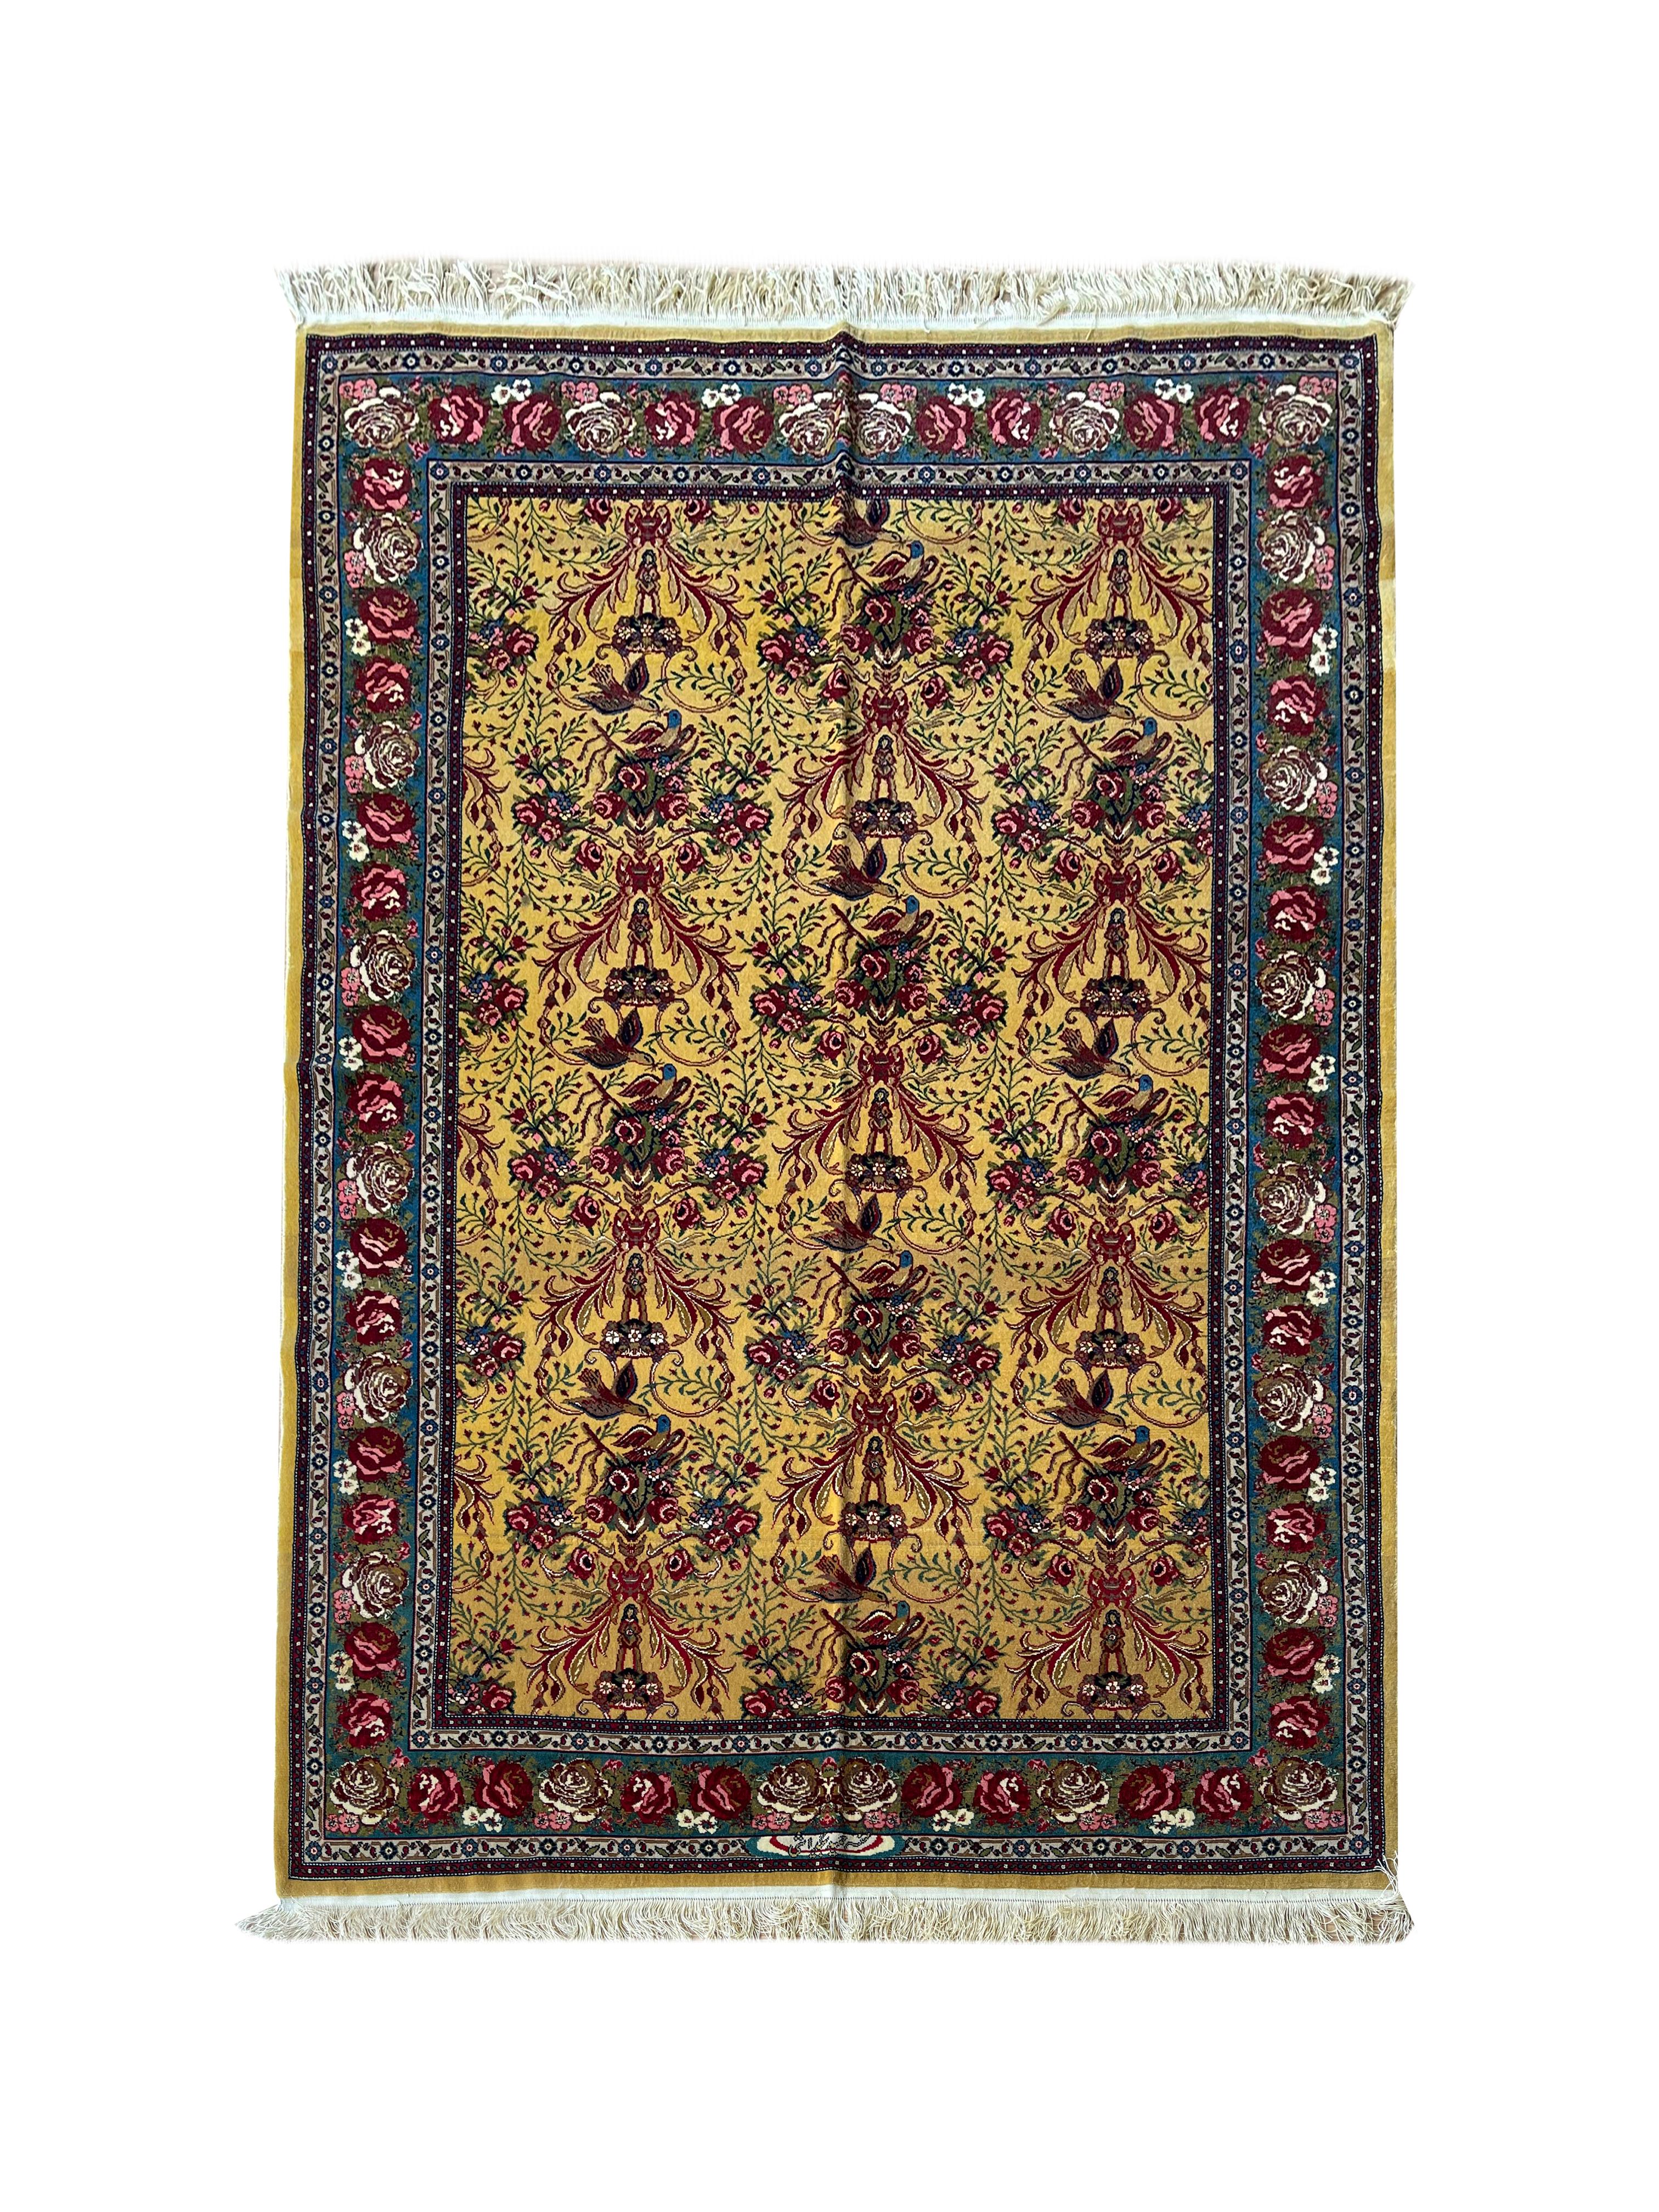 Vegetable Dyed Outstanding Rug, All Over Paradise Carpet, Handwoven Gold Rug For Sale